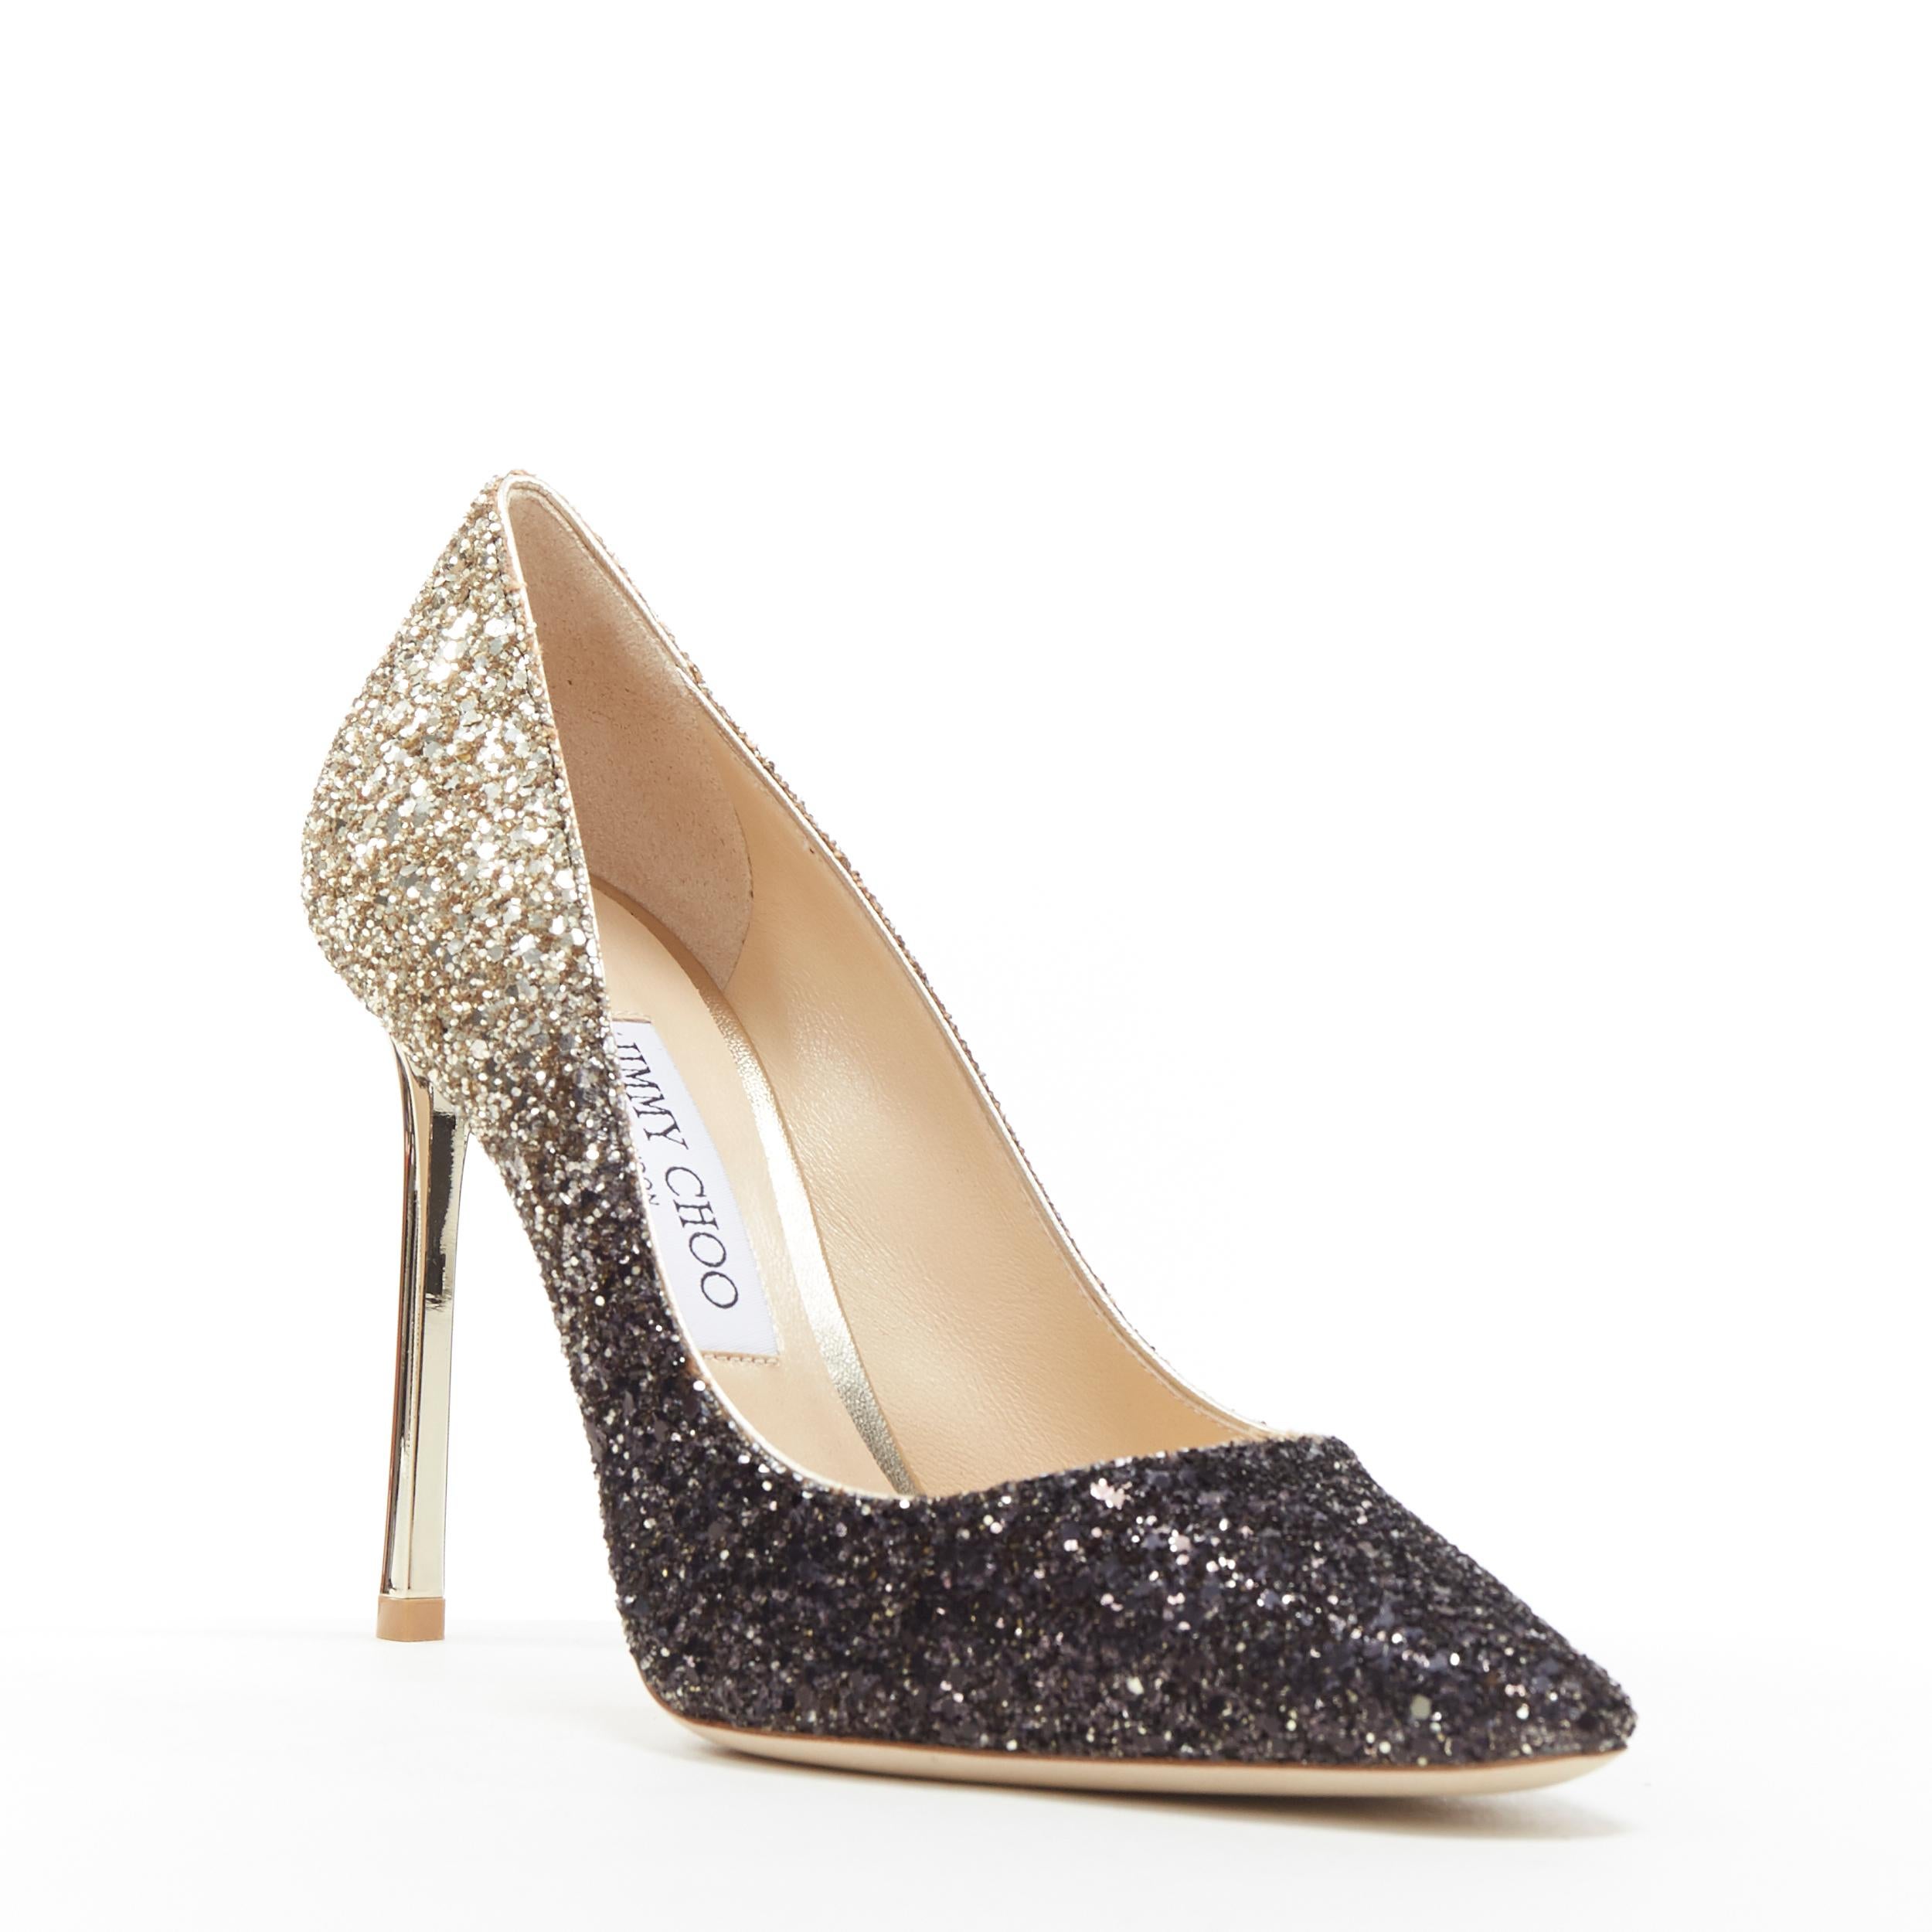 new JIMMY CHOO Romy 100 black gold gradient course glitter pointy toe pump EU37
Brand: Jimmy Choo
Designer: Jimmy Choo
Model Name / Style: Romy 100
Material: Leather
Color: Gold
Pattern: Solid
Closure: Slip on
Extra Detail: Leather upper covered in